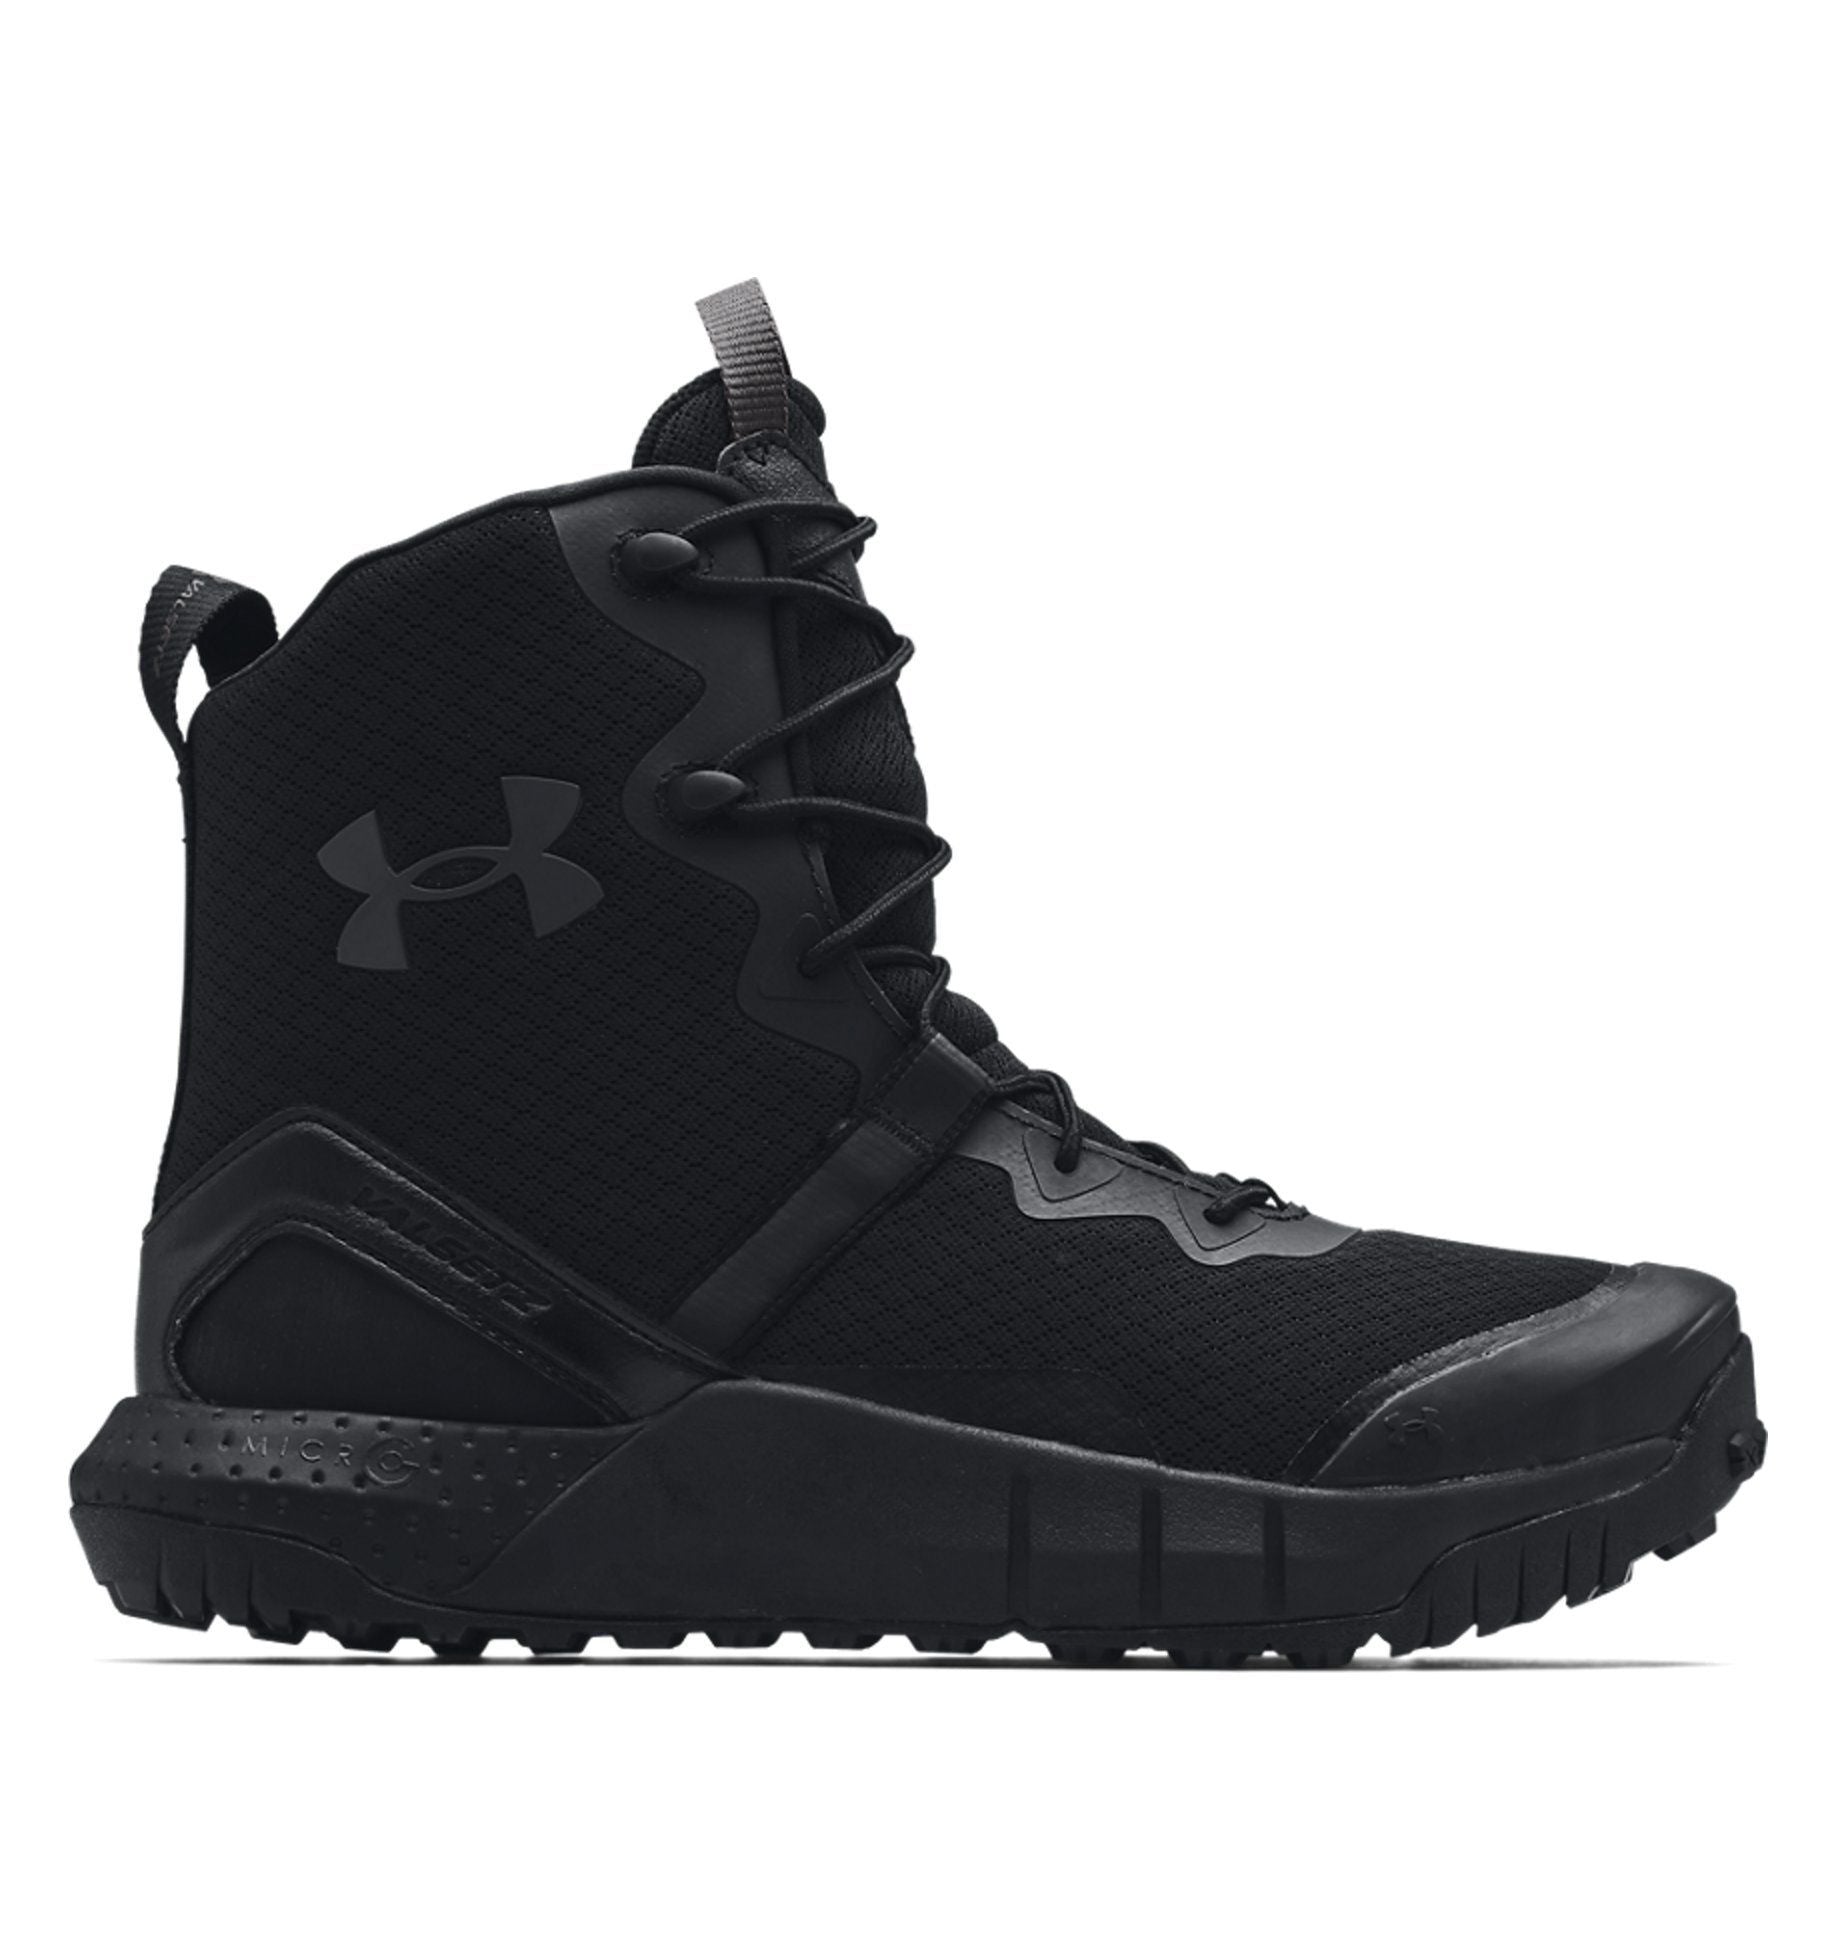 Under Armour Micro G Valsetz 8-Inch Tactical Boot 3023743